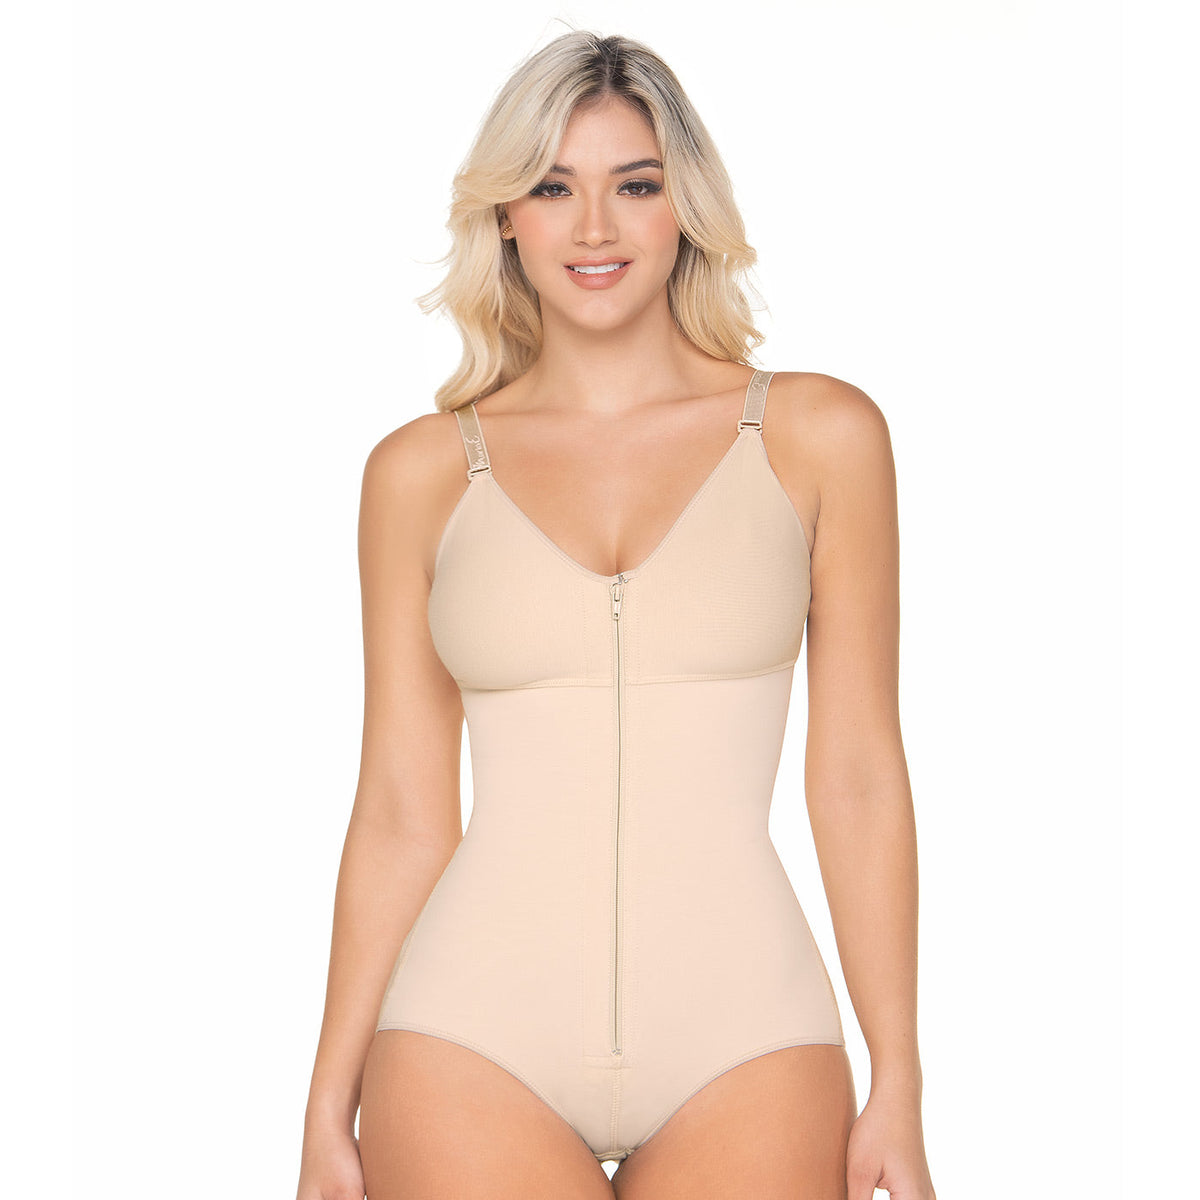 SIDE ZIPPER CLOSURE TUMMY SLIMMING BODY SHAPER WITH OPEN BUST STYLE